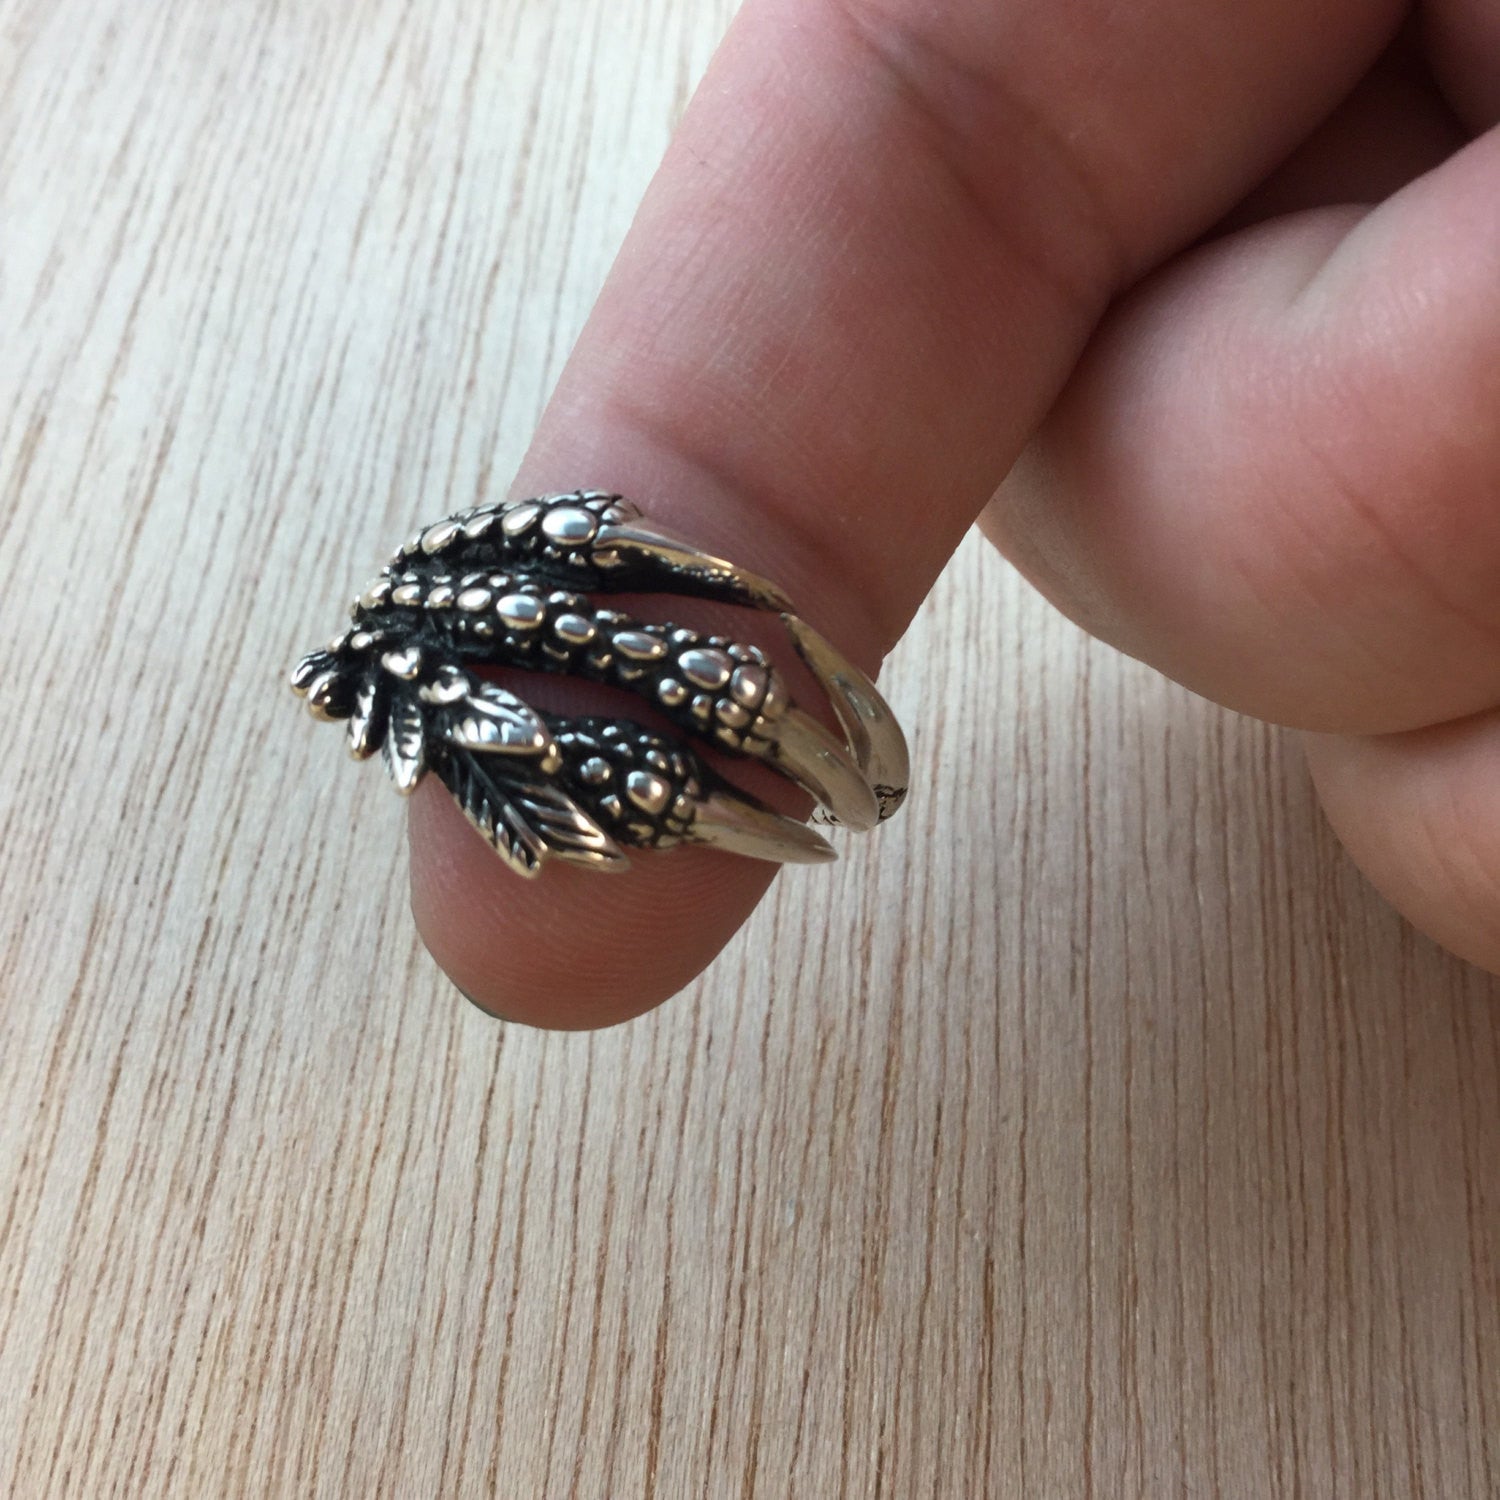 Titanium Steel Dragon Claw Rings for Men Cool Male Biker Ring Punk Jewelry  Personalized Gift (Pattern 4) - Walmart.com